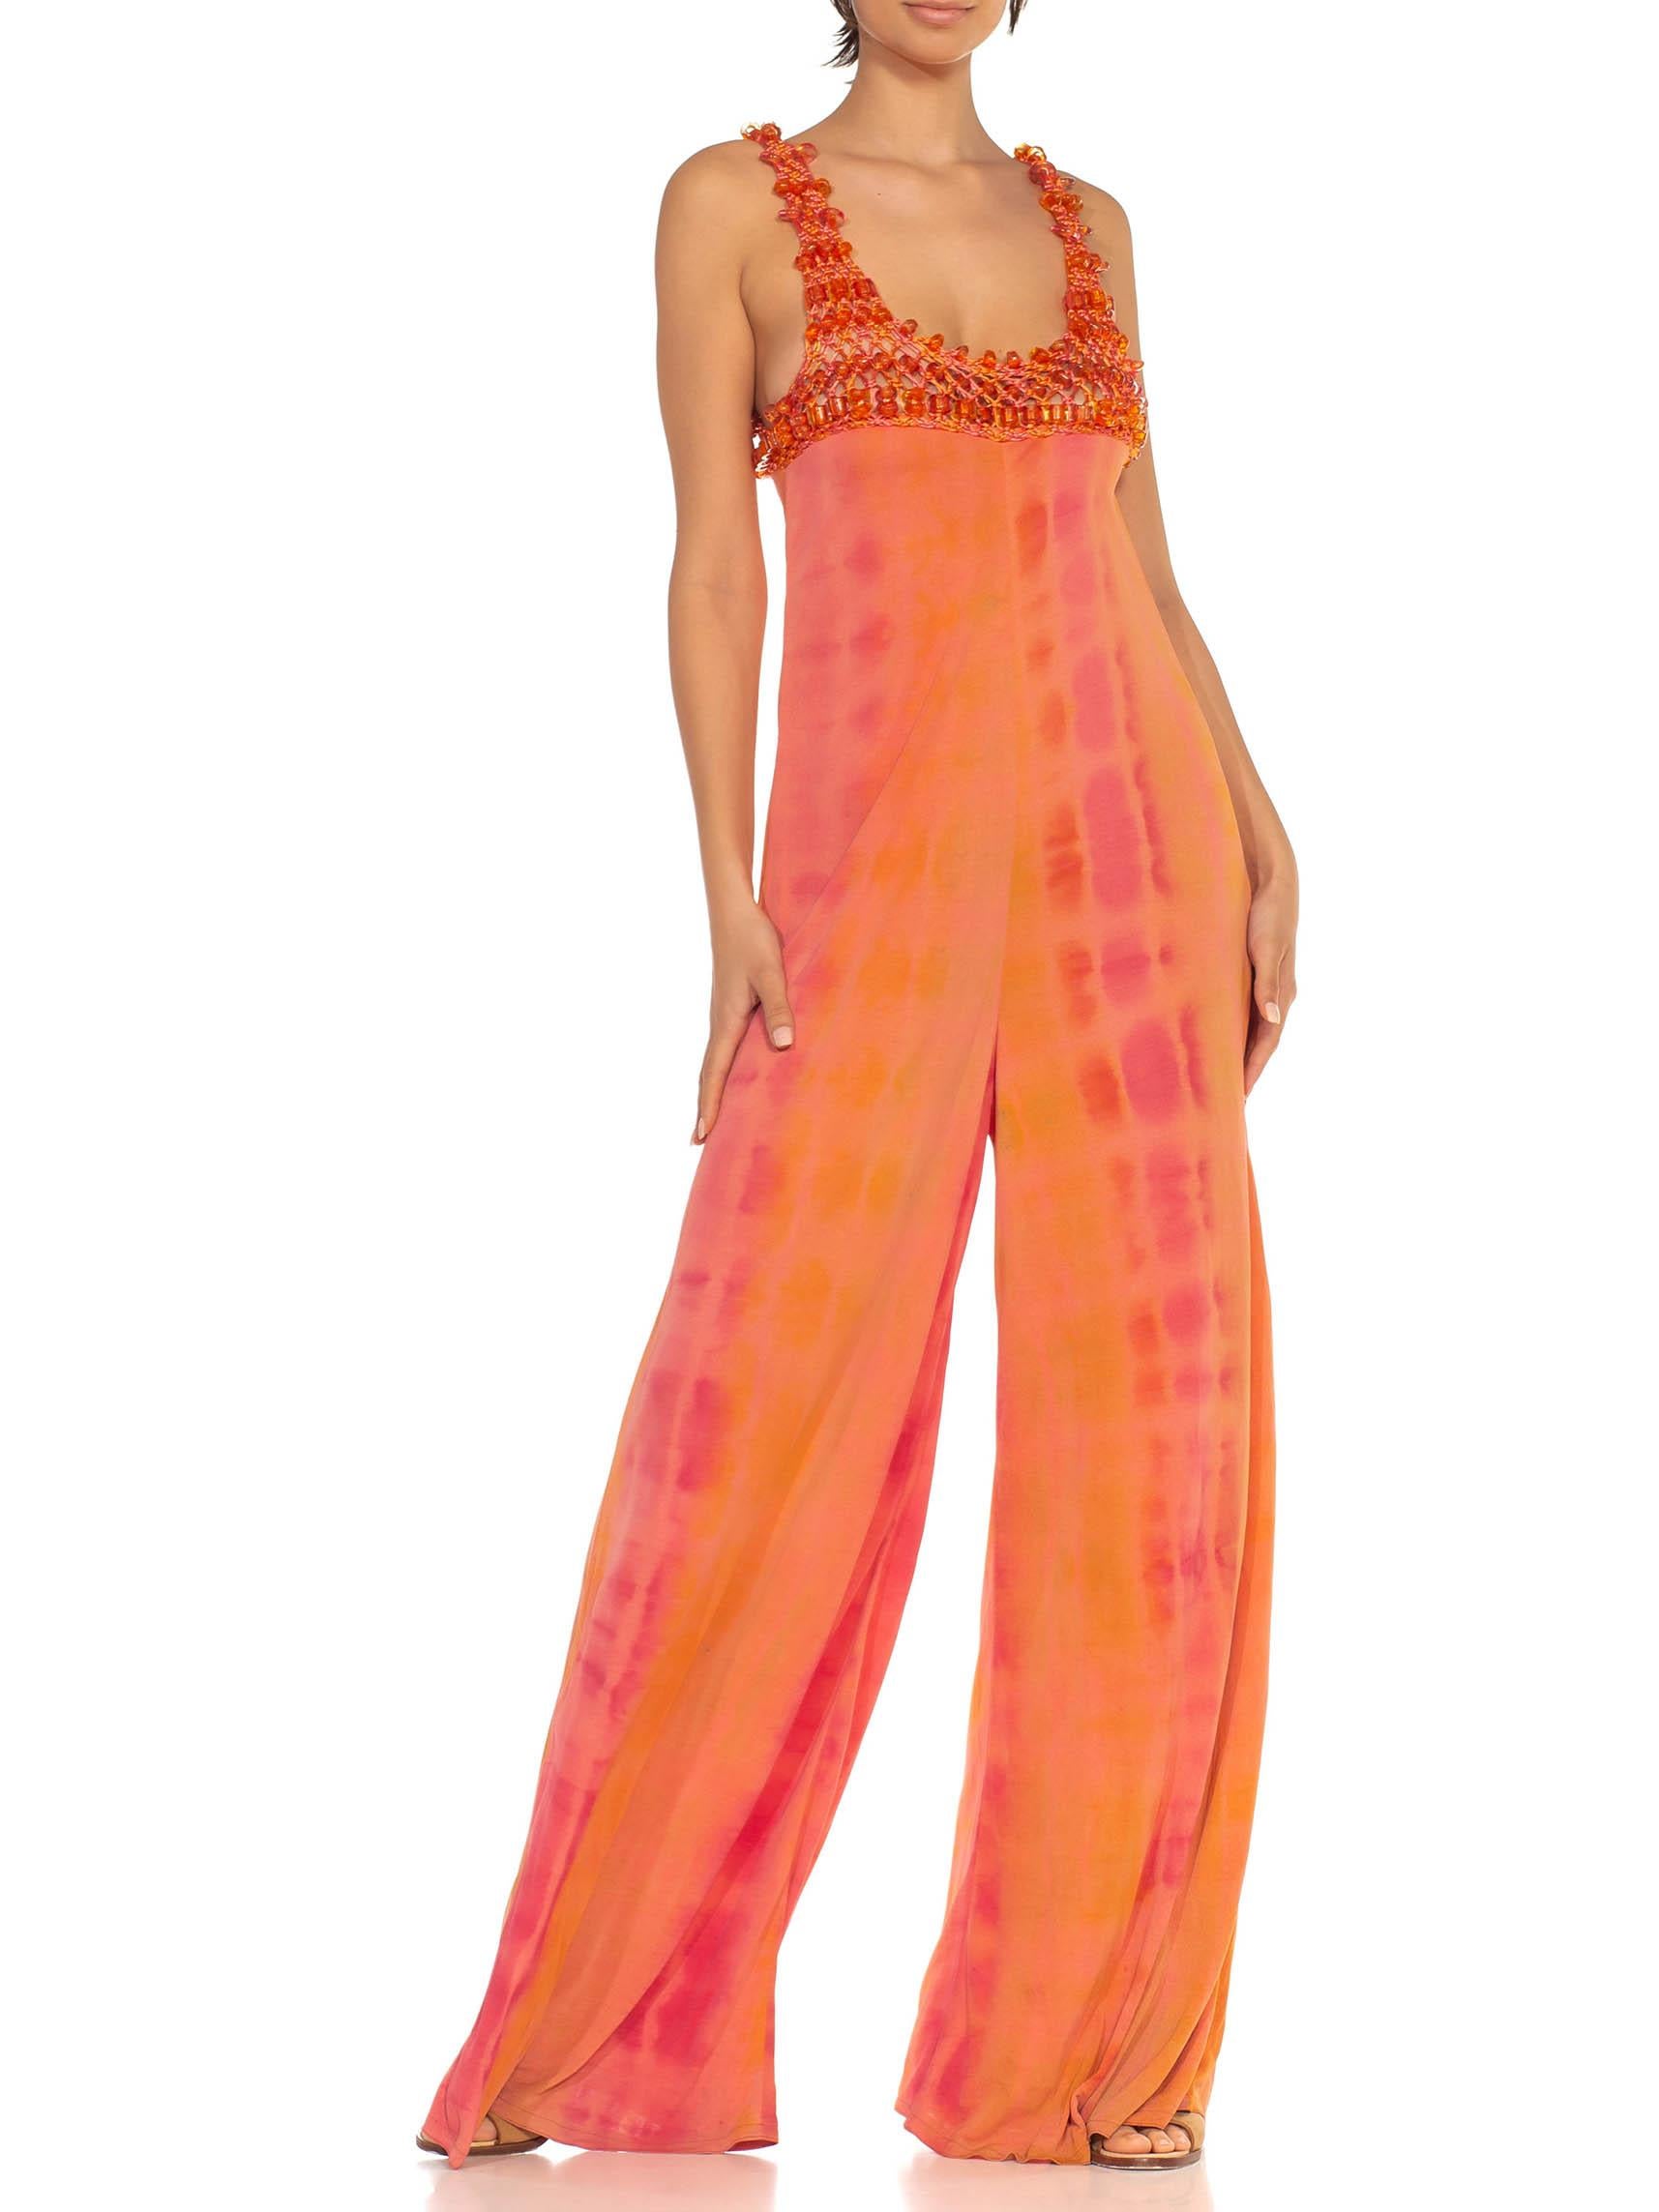 2000S Orange Peach Poly Blend Jersey Tie Dye Jumpsuit With Crochet Beaded Straps For Sale 4